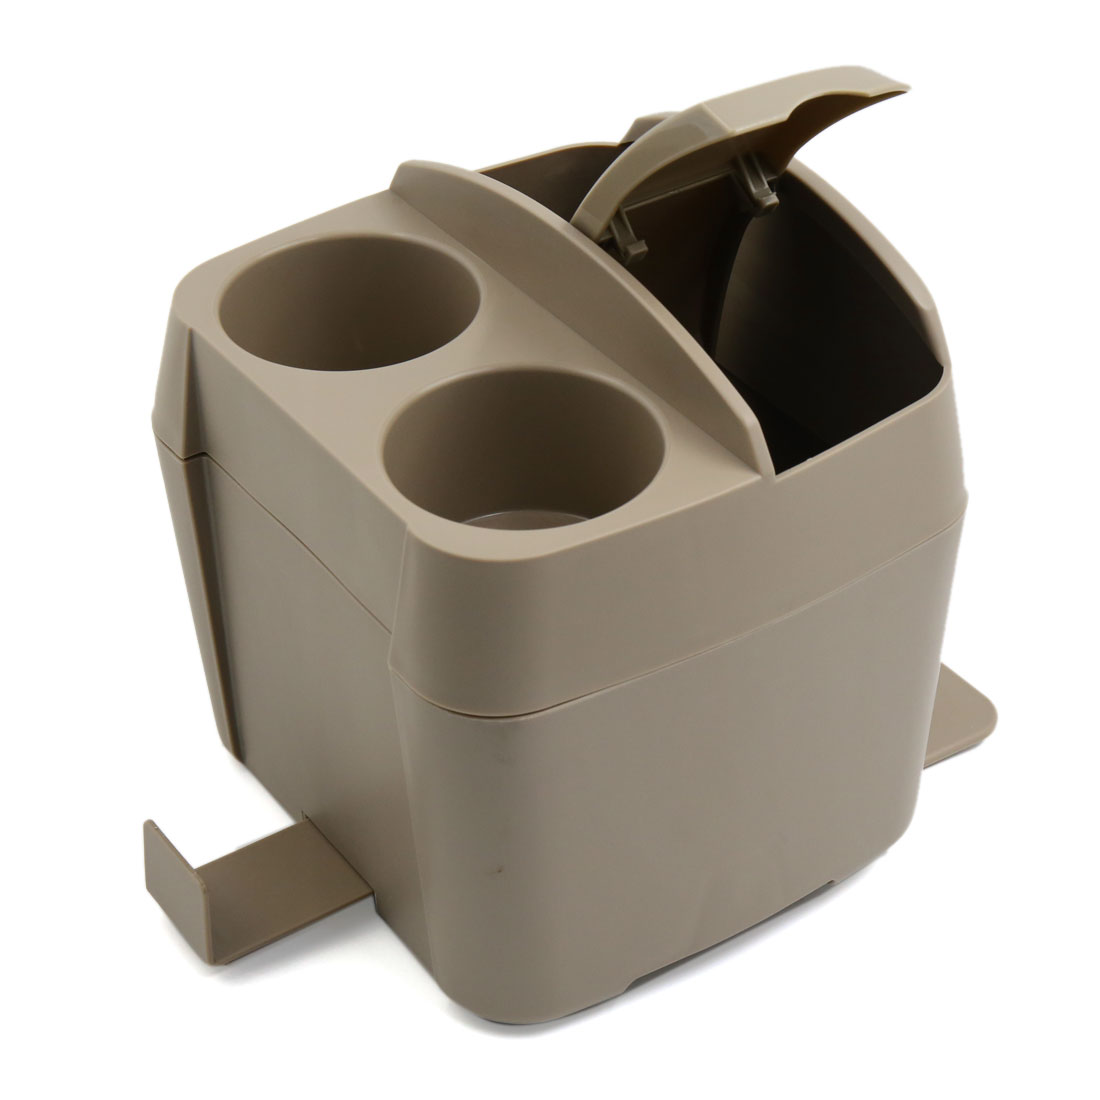 Unique Bargains Home Office Vehicle Car Plastic Garbage Storage Container Cup Tissue Box Holder Beige